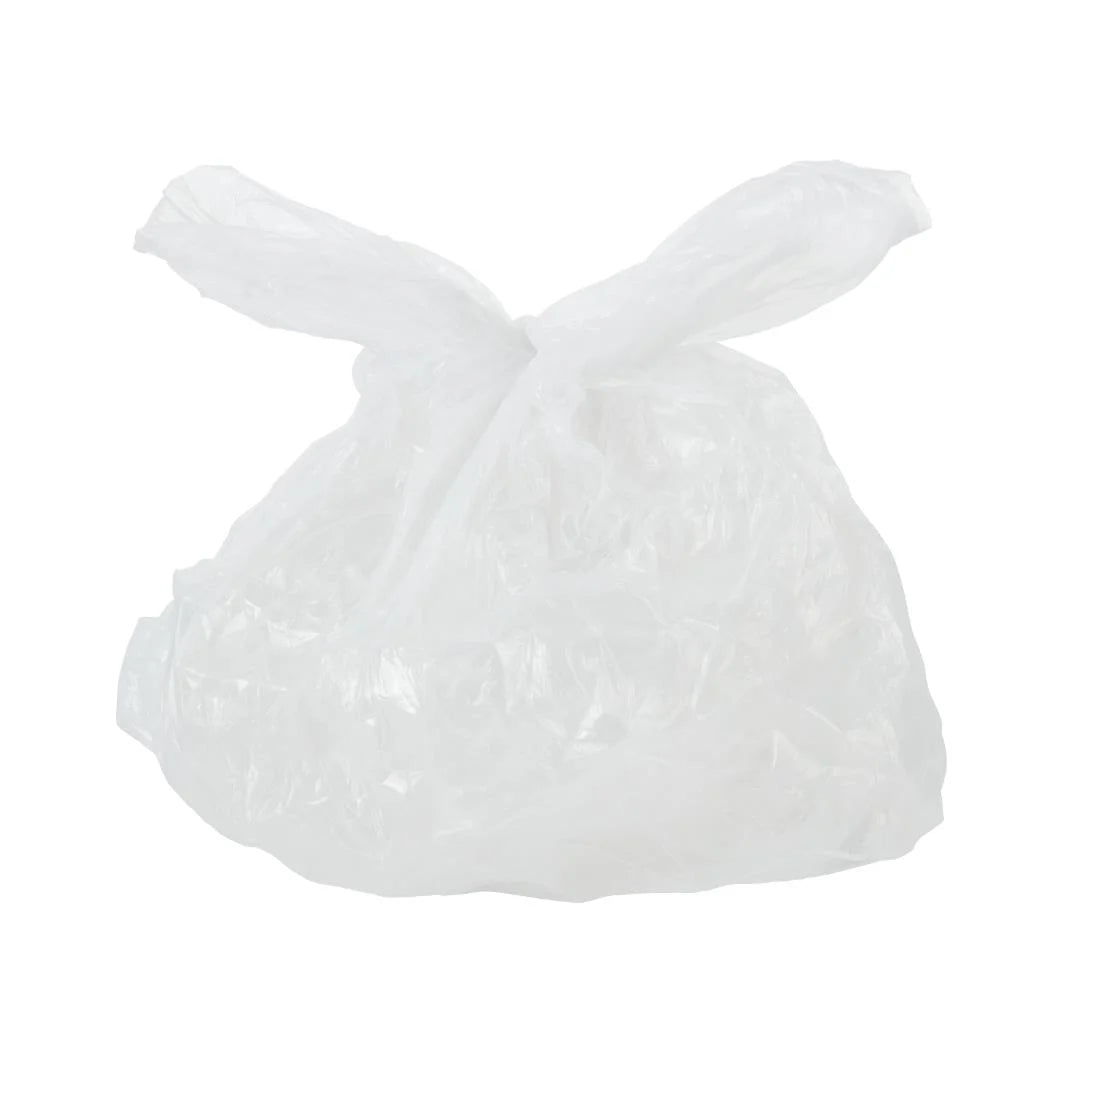 Jantex Small White Pedal Bin Liners 10Ltr (Pack of 1000) JD Catering Equipment Solutions Ltd